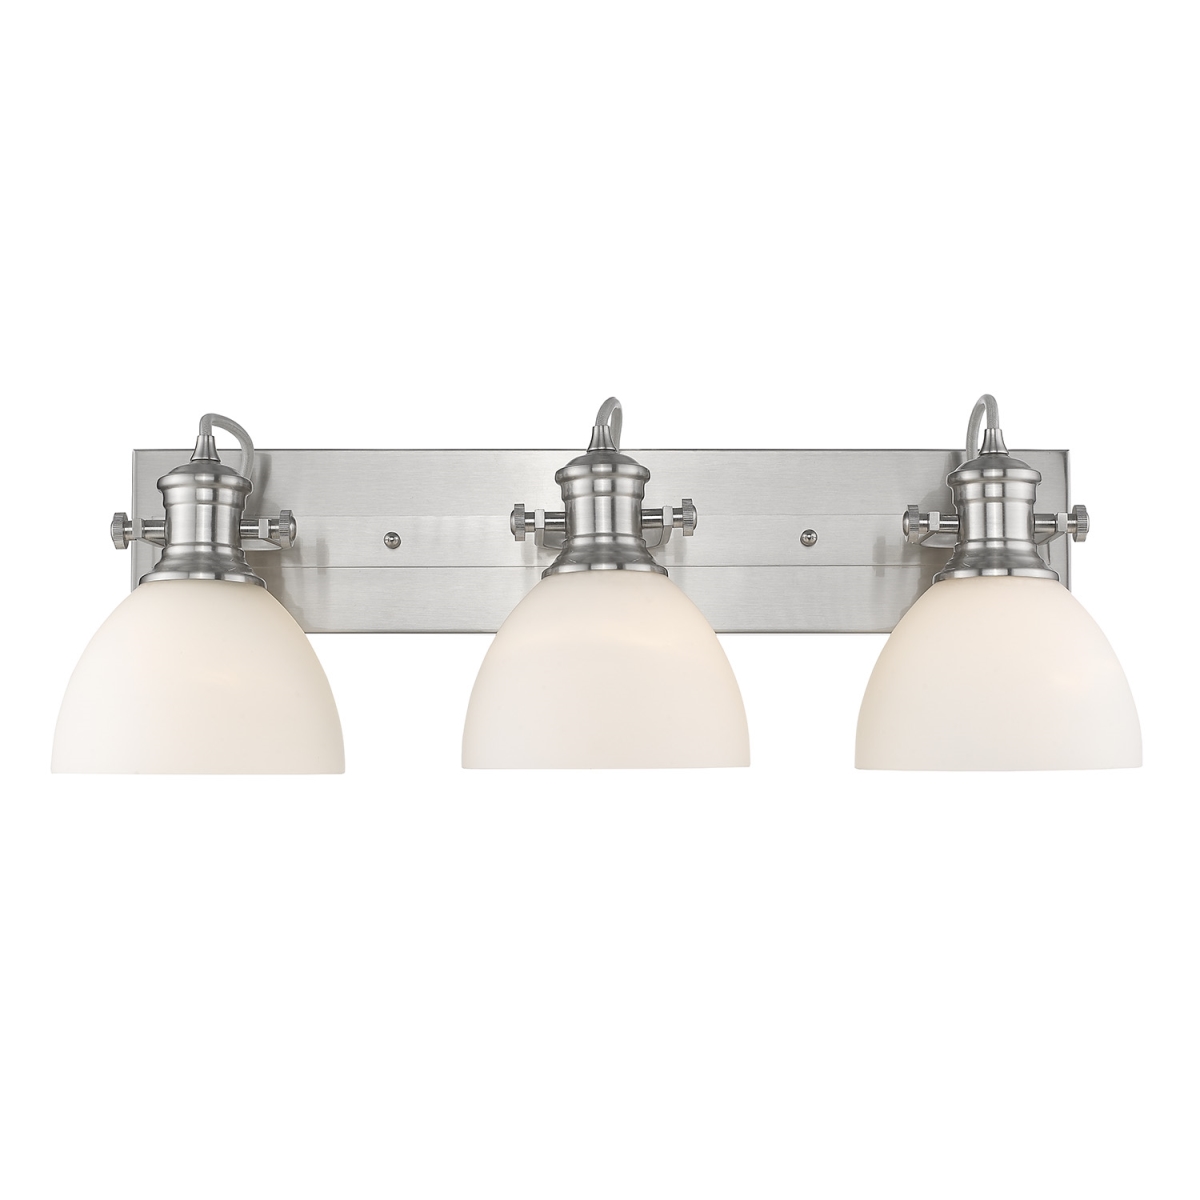 3118-ba3 Pw-op 25 In. Hines 3 Lights Pewter Bath Fixture Wall Light With Opal Glass, Silver - 120v